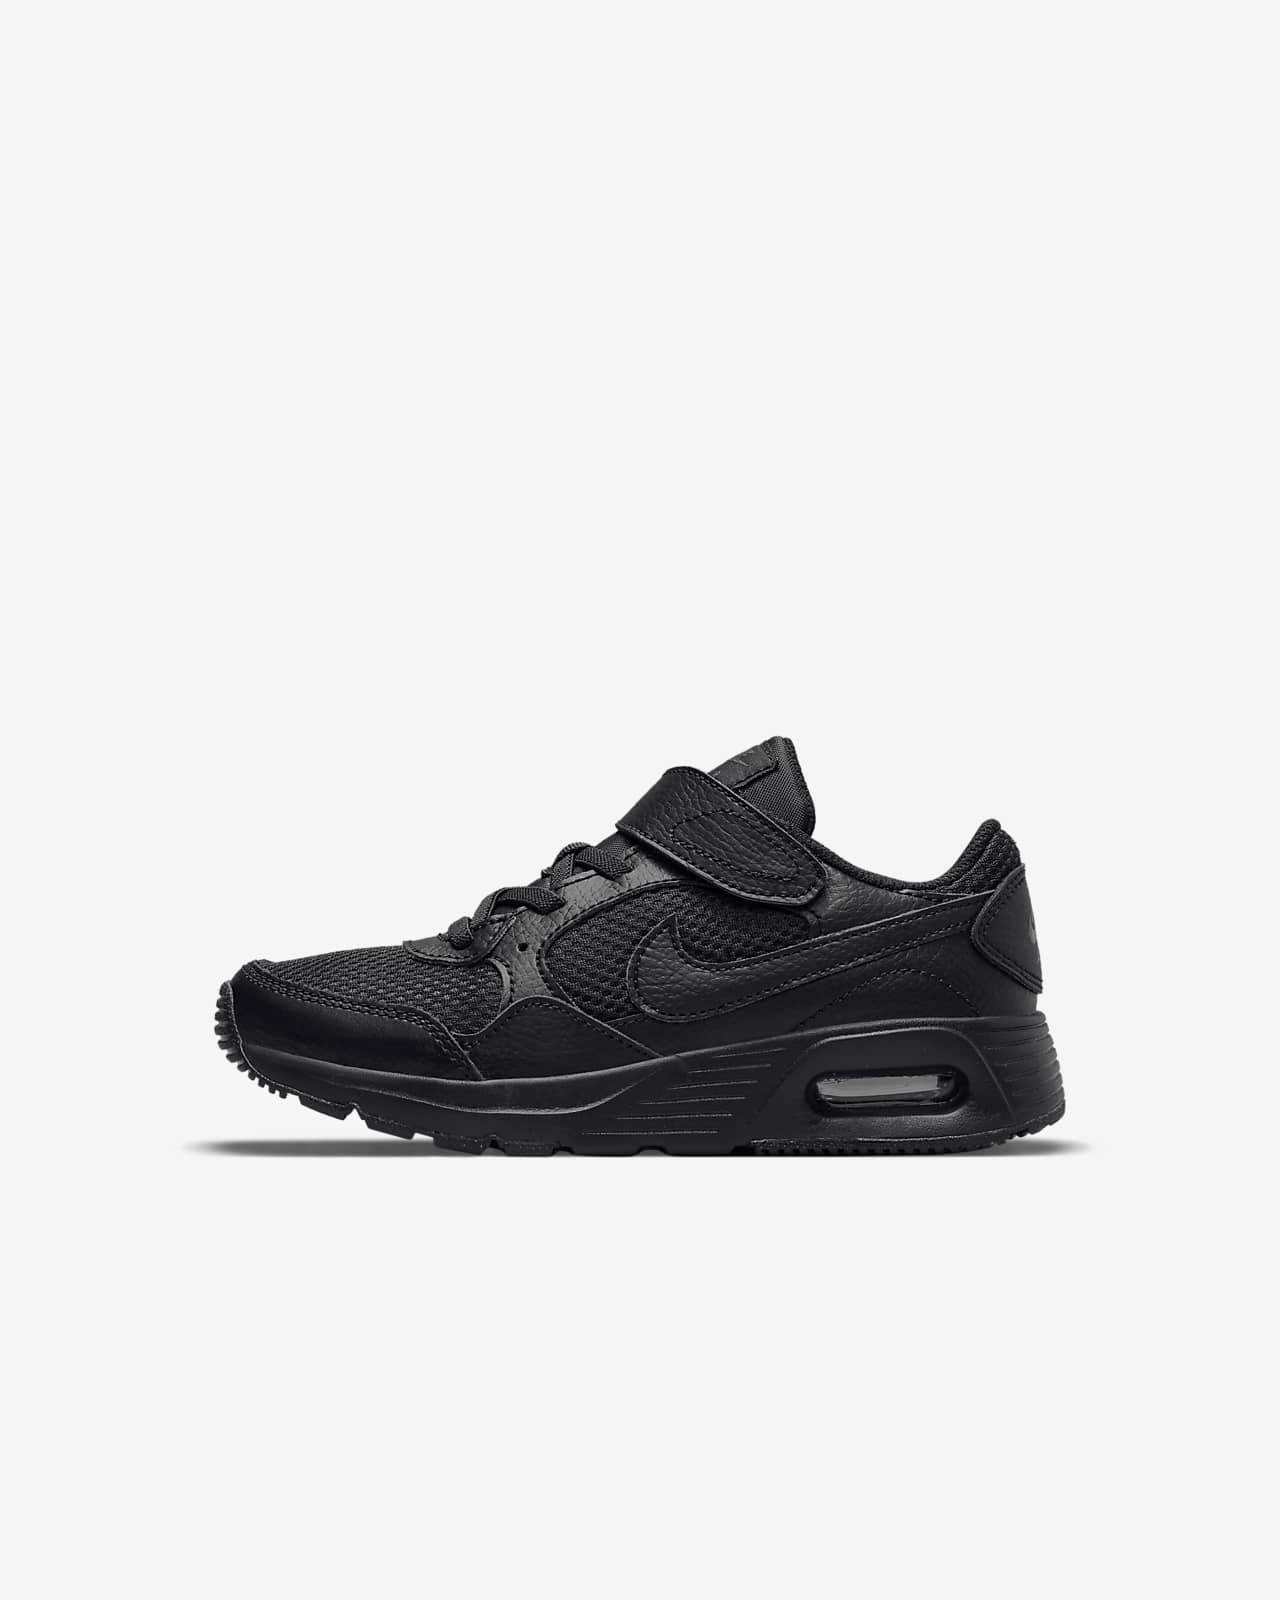 Nike Air Max SC Younger Kids' Shoes